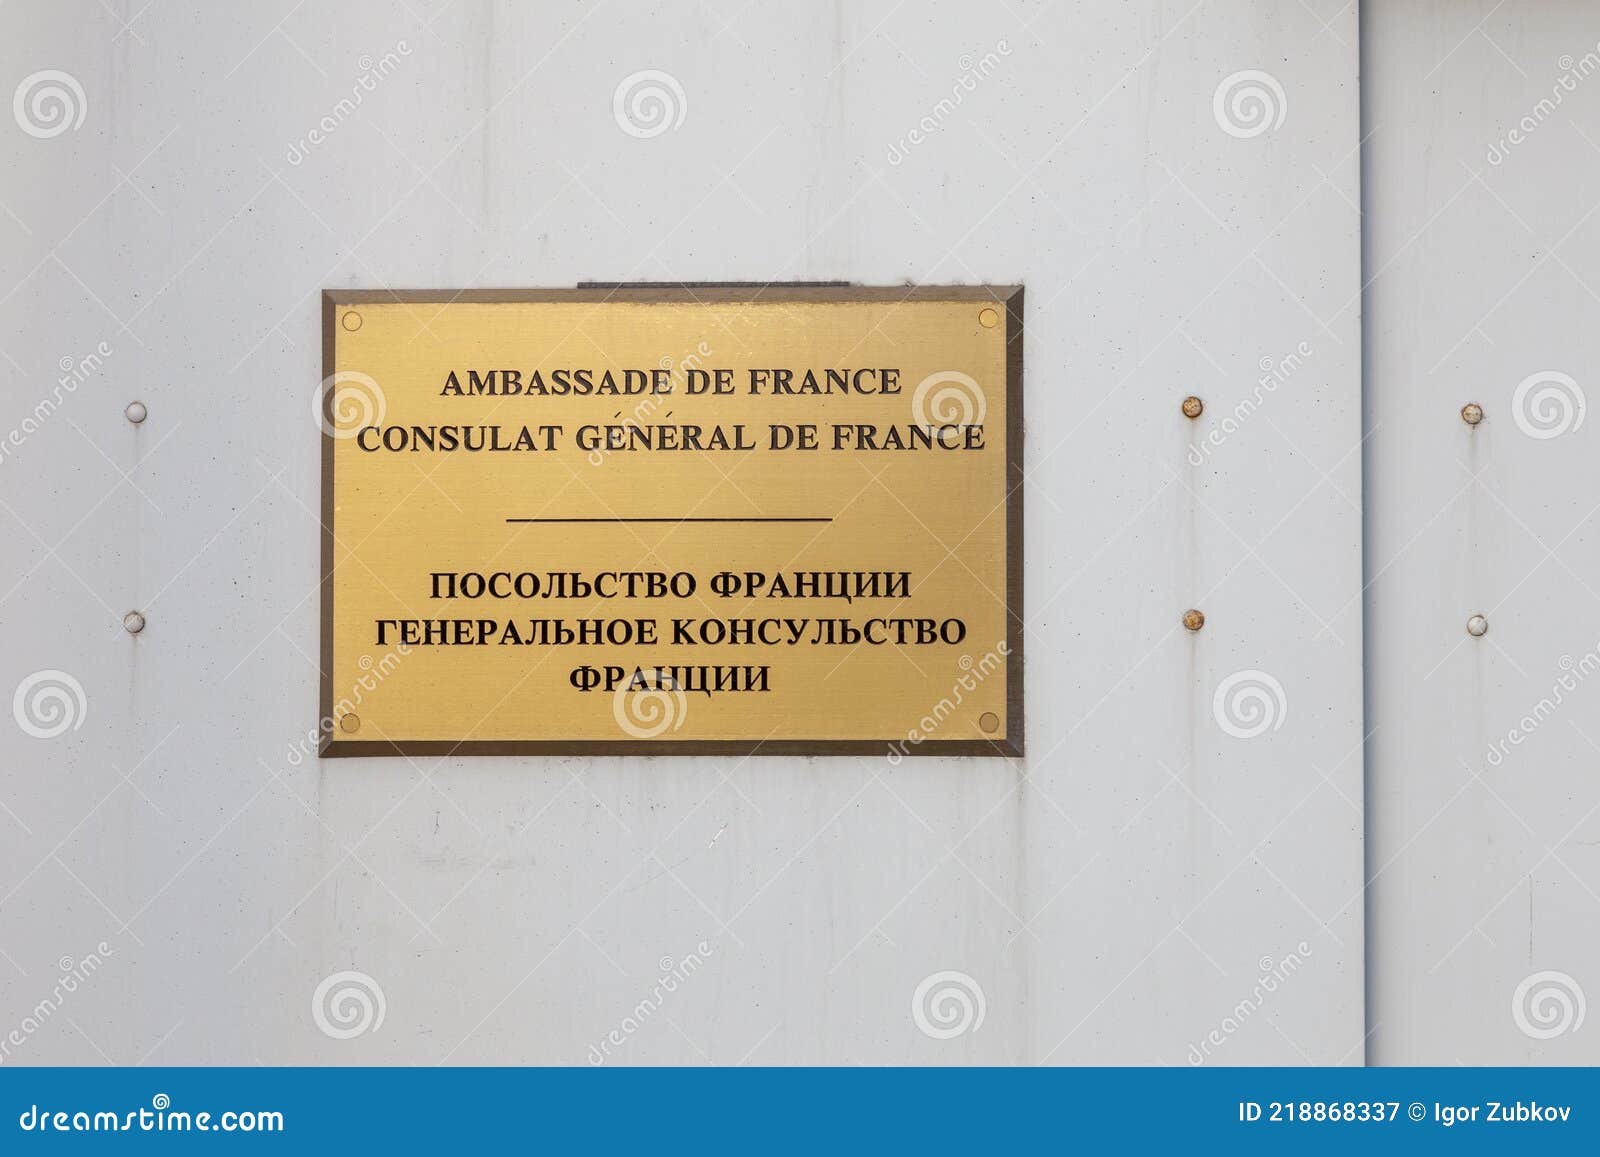 French Consulate Historical Marker